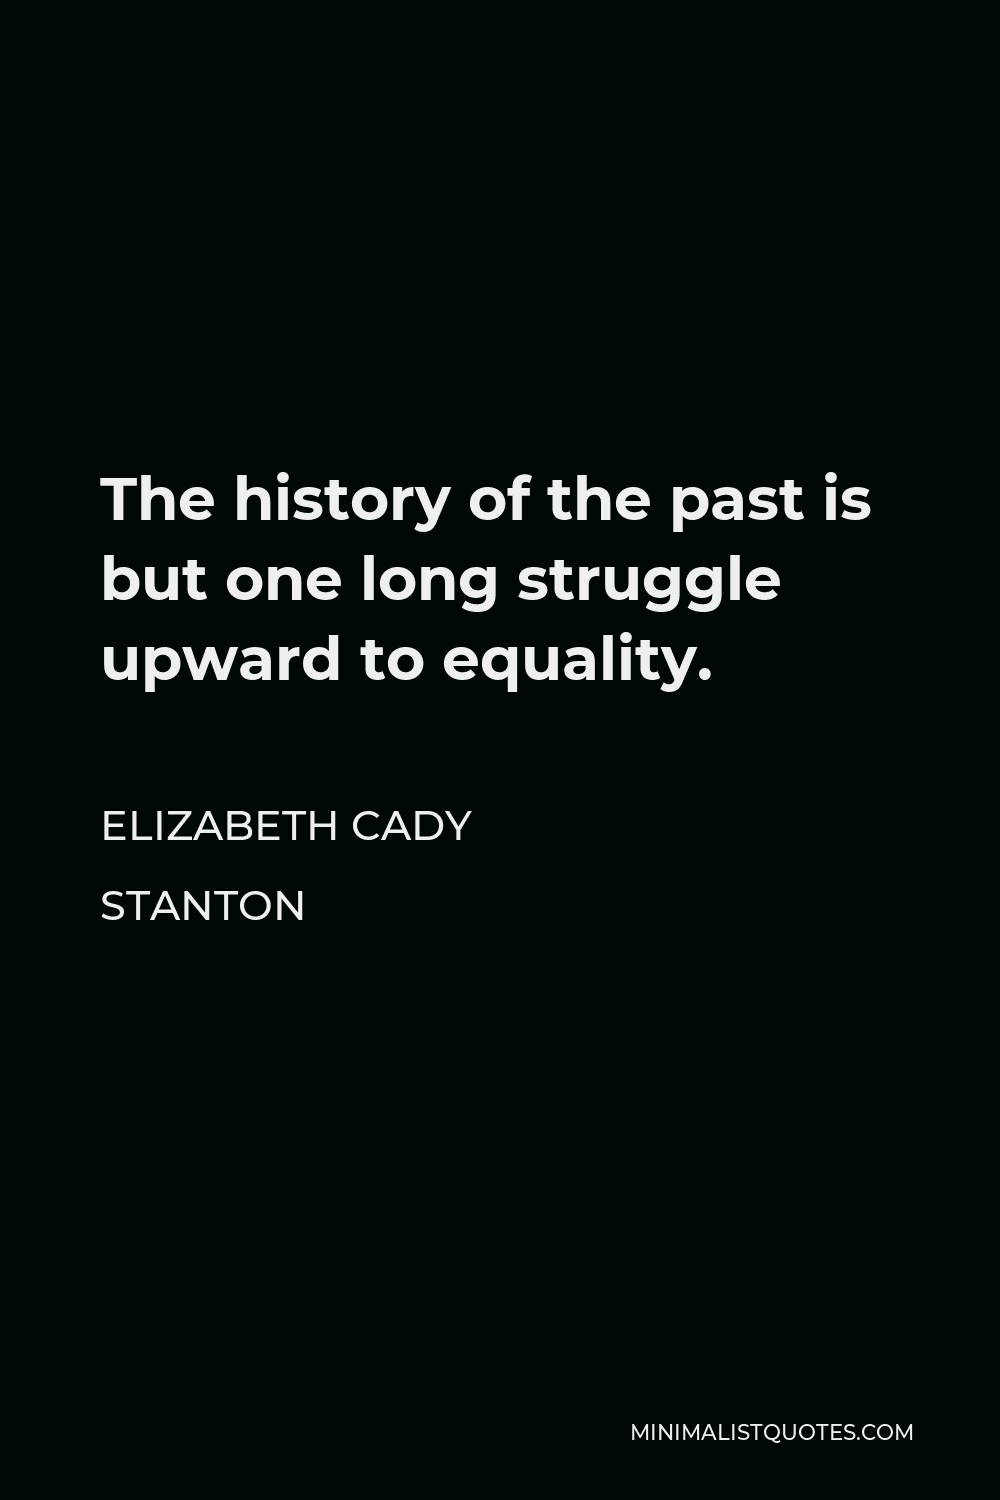 Elizabeth Cady Stanton Quote - The history of the past is but one long struggle upward to equality.